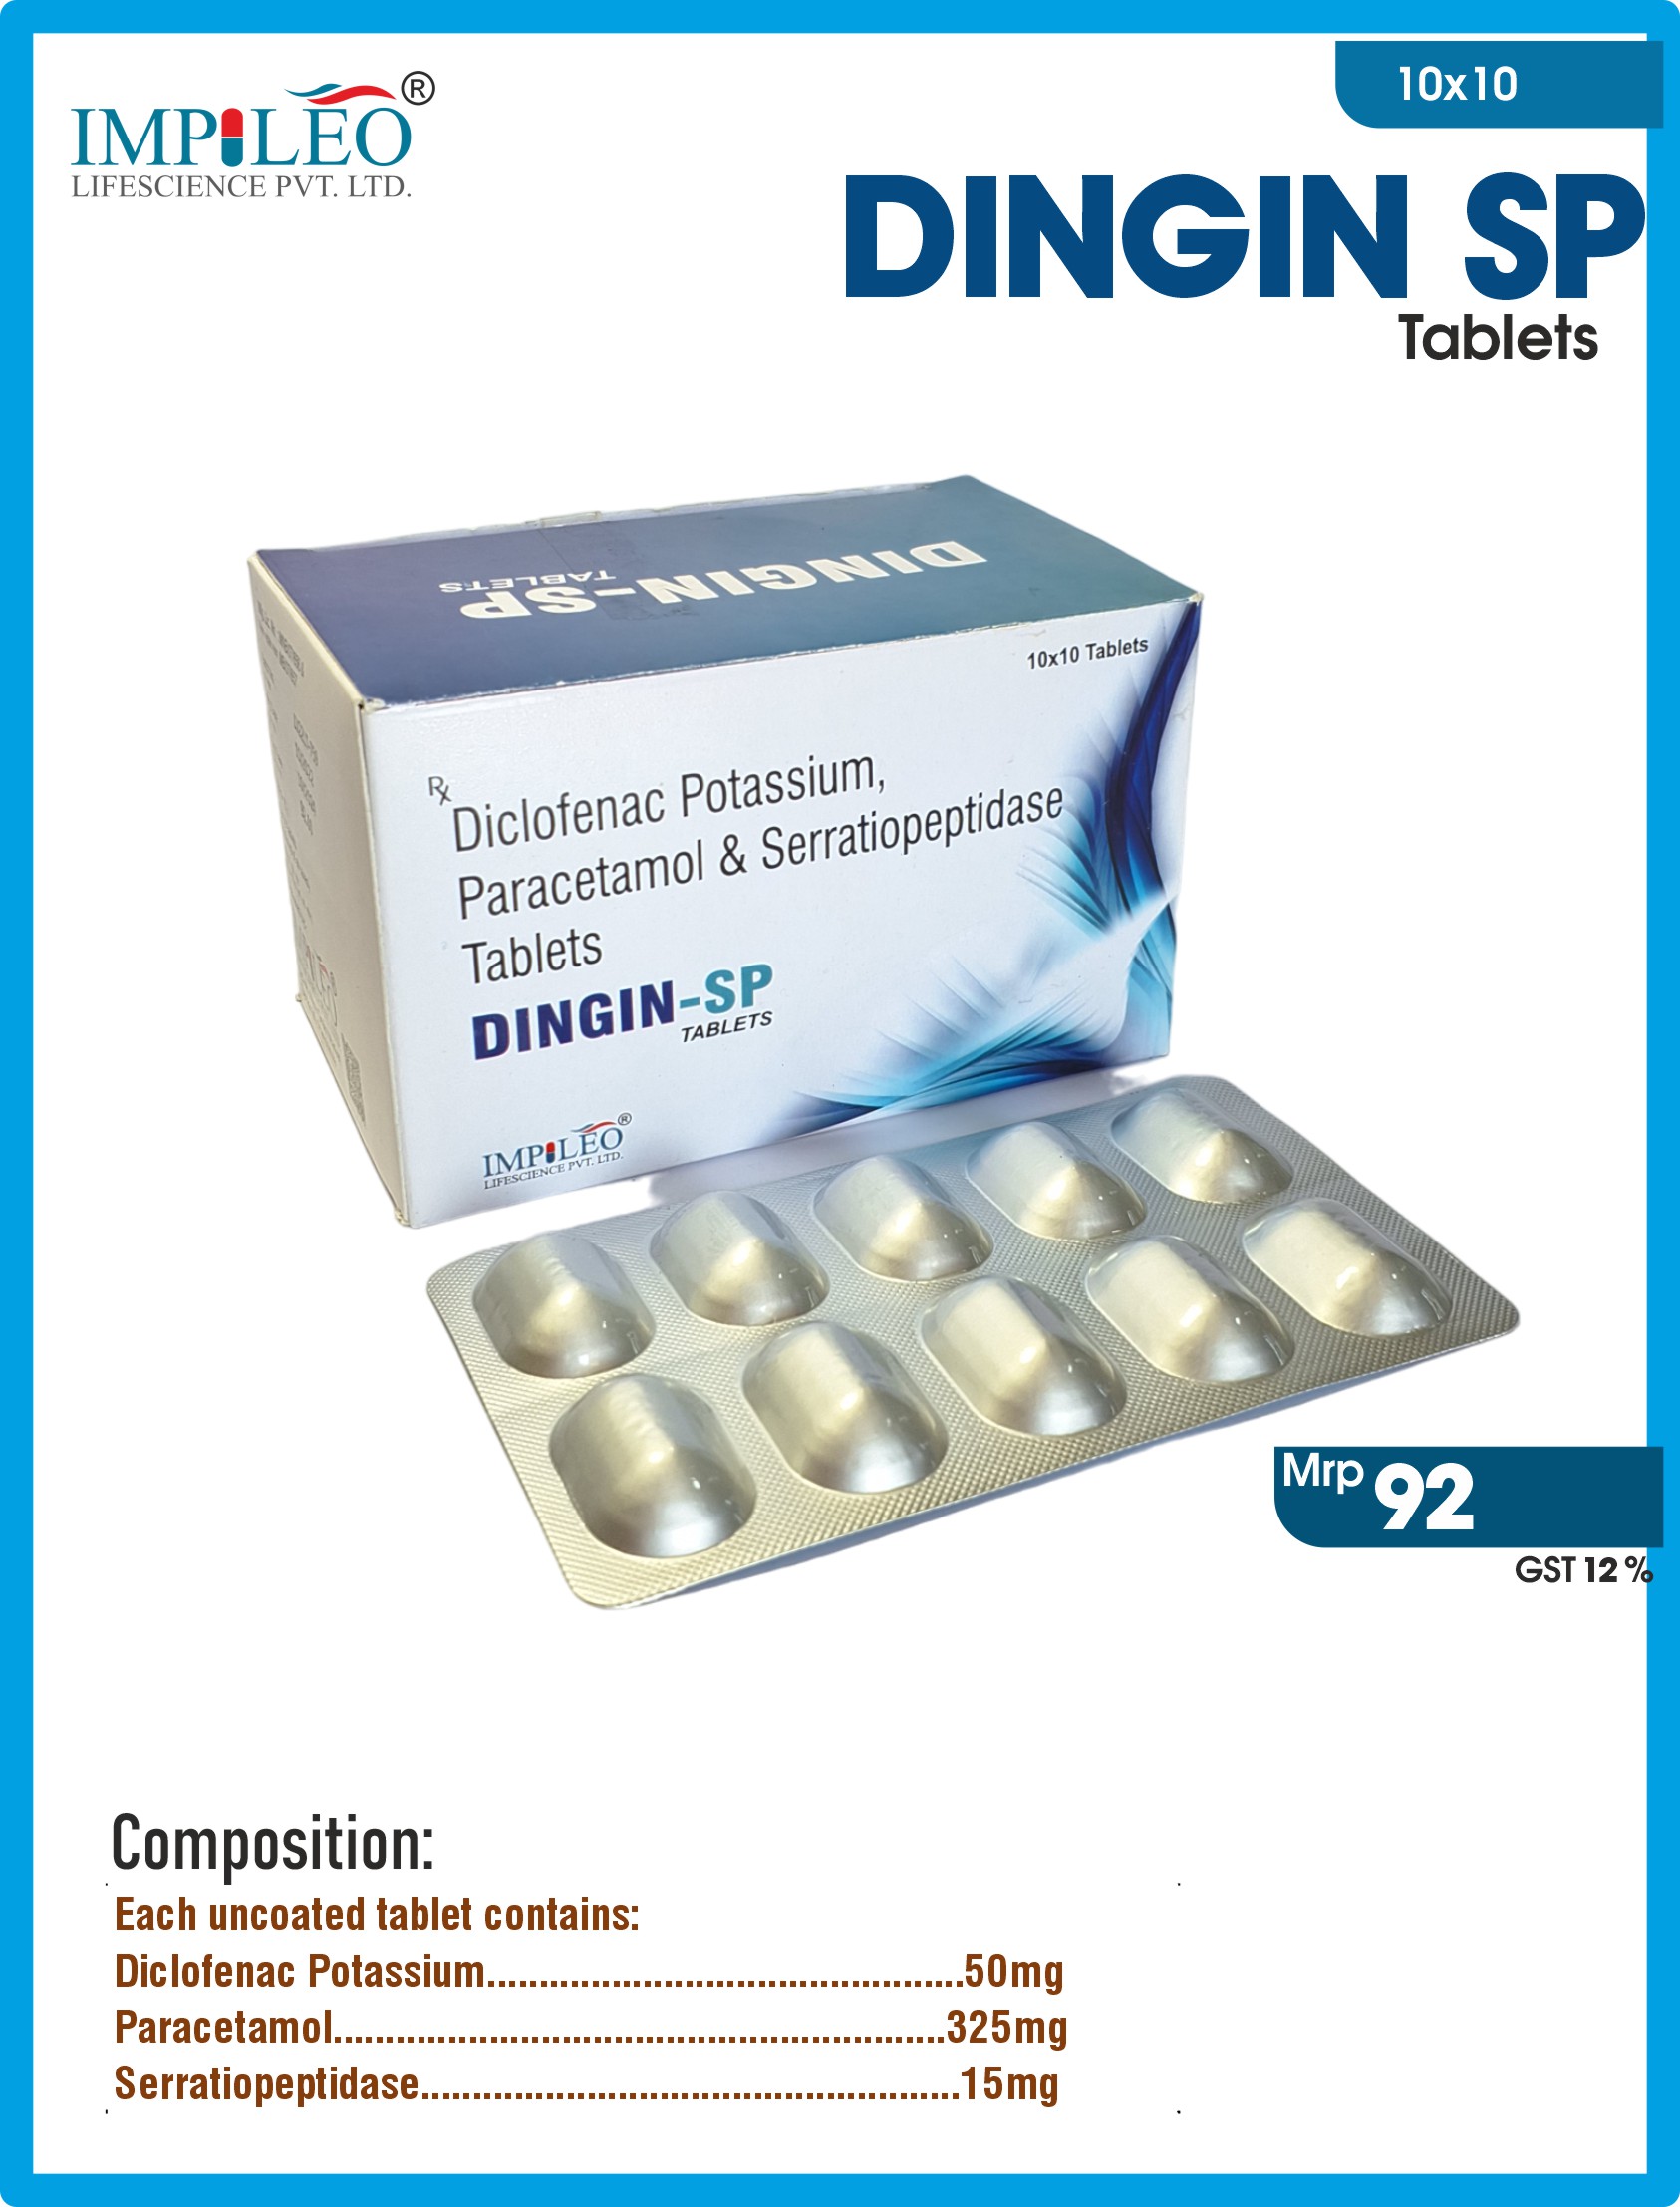 Elevate Your Health : Premium DINGIN-SP™ Tablets Made By Top Third-Party Manufacturing in Baddi